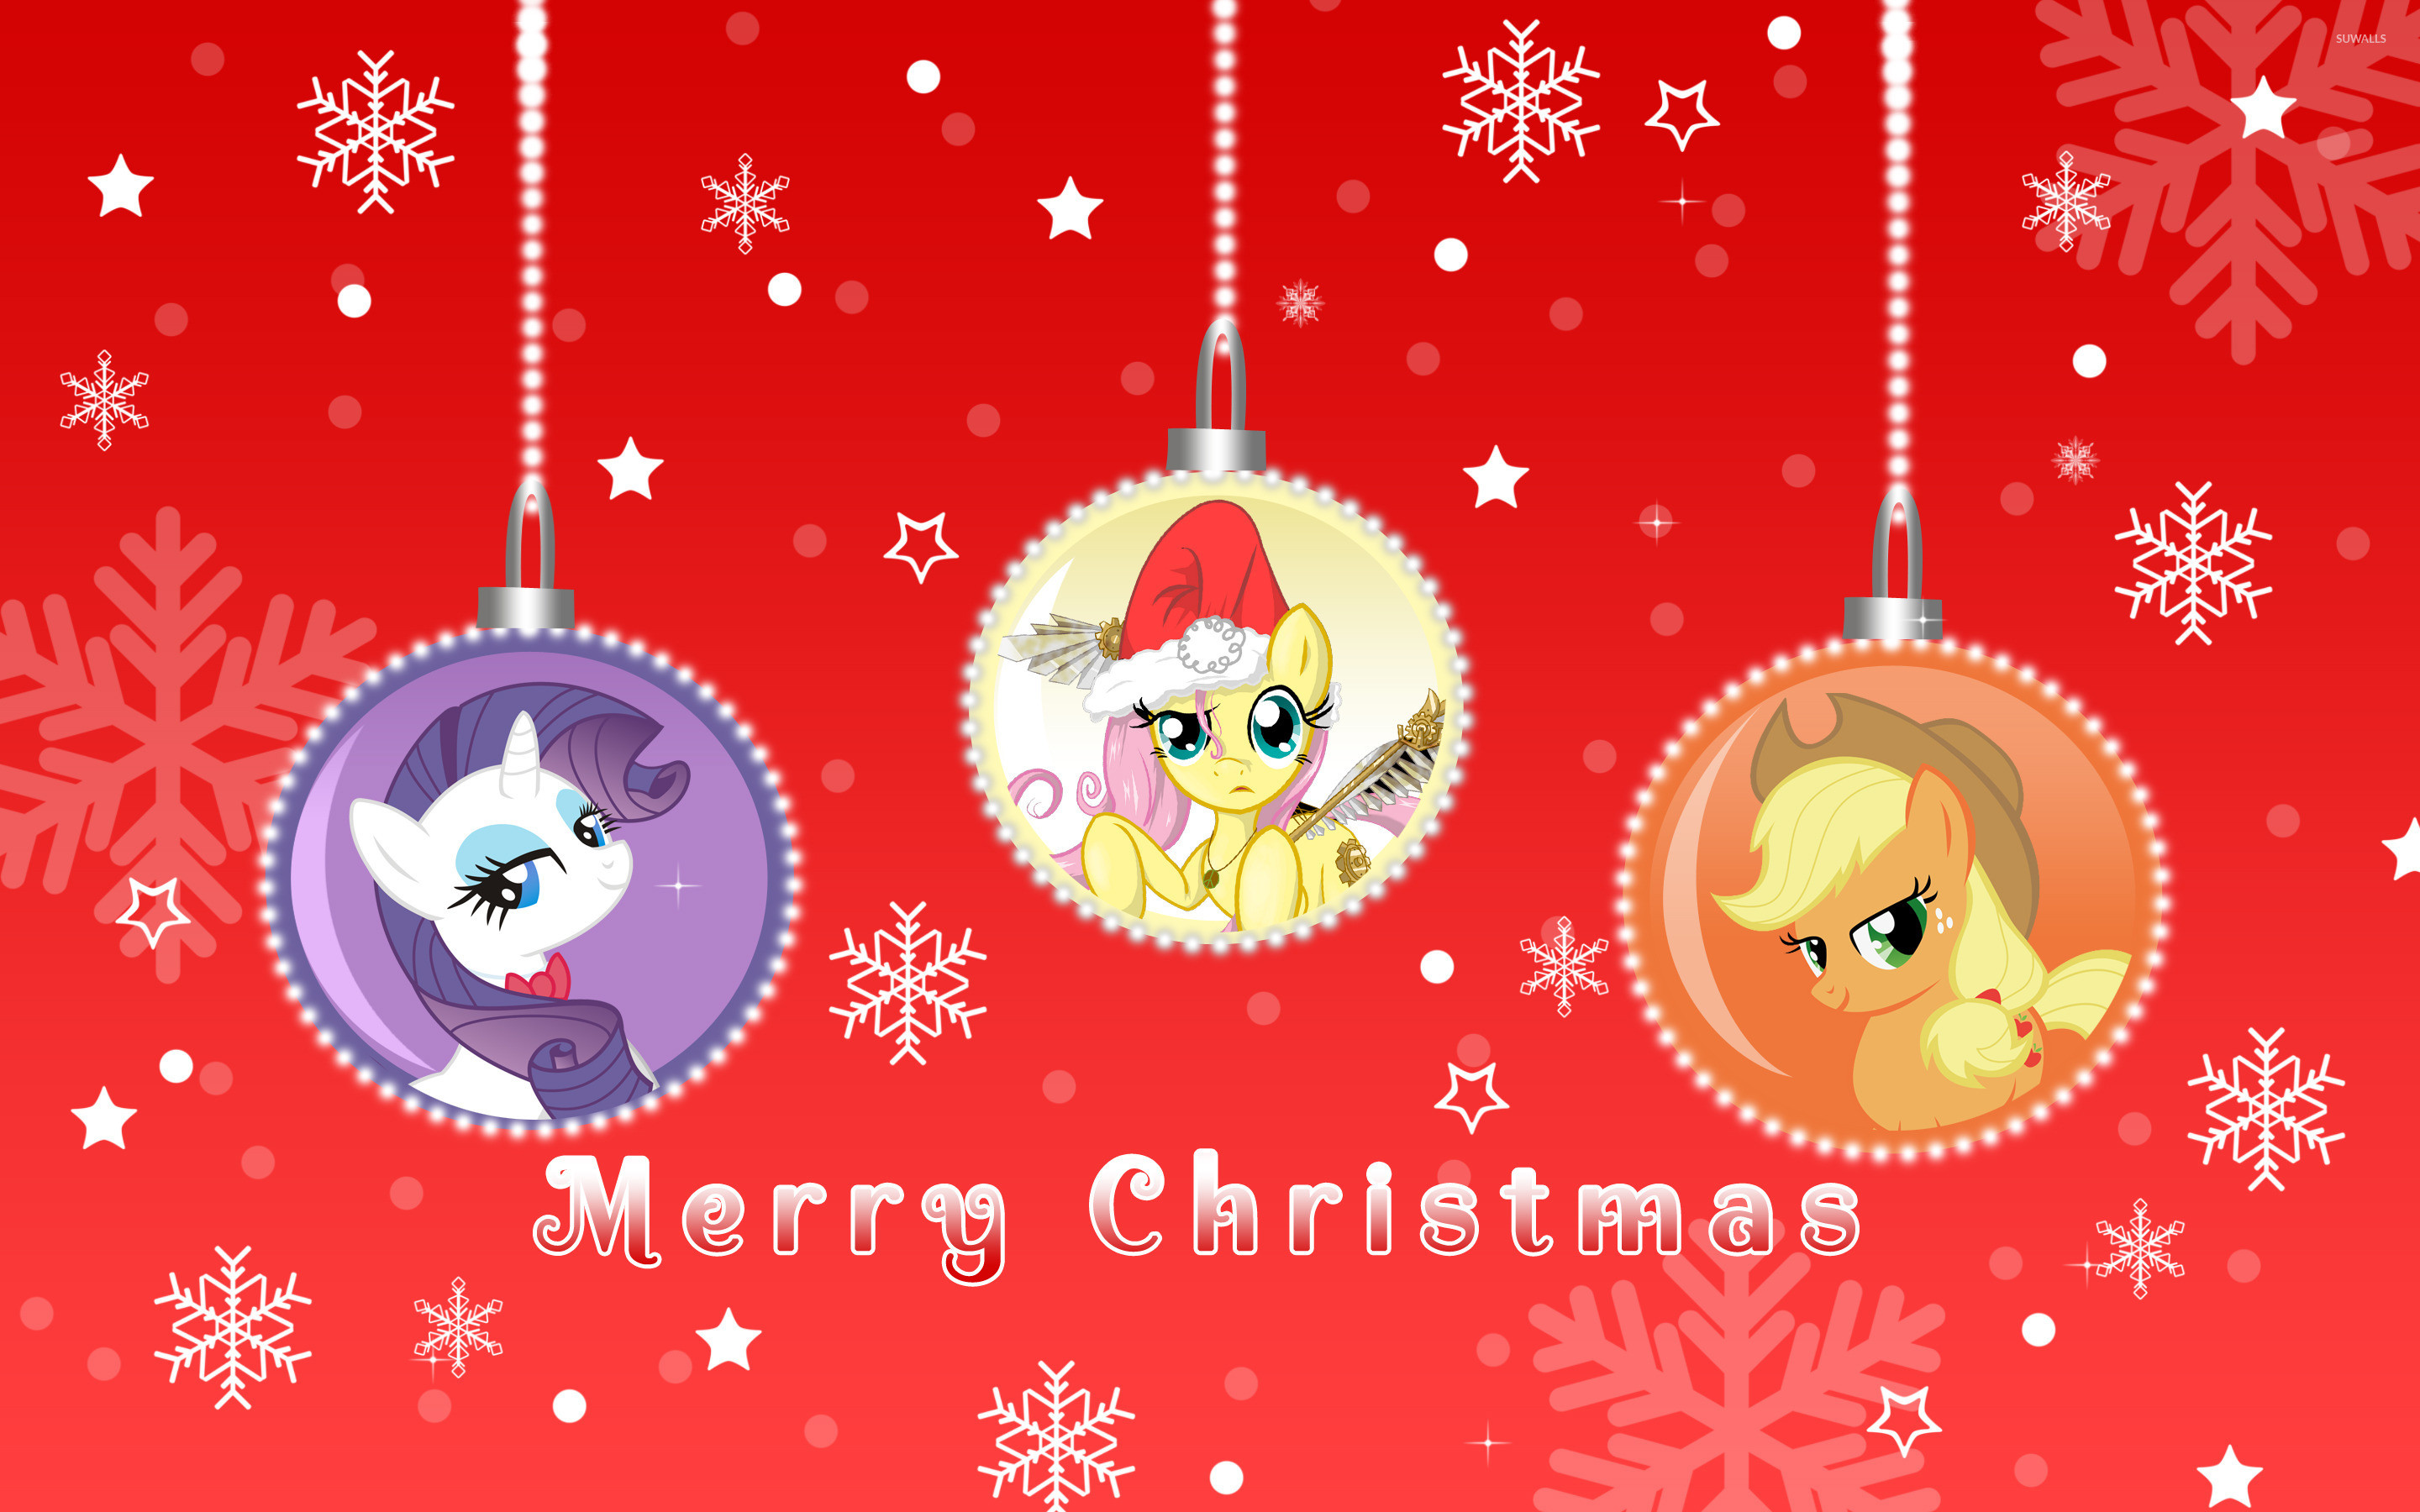 Merry My Little Pony Friendship is Magic Christmas 2 wallpaper